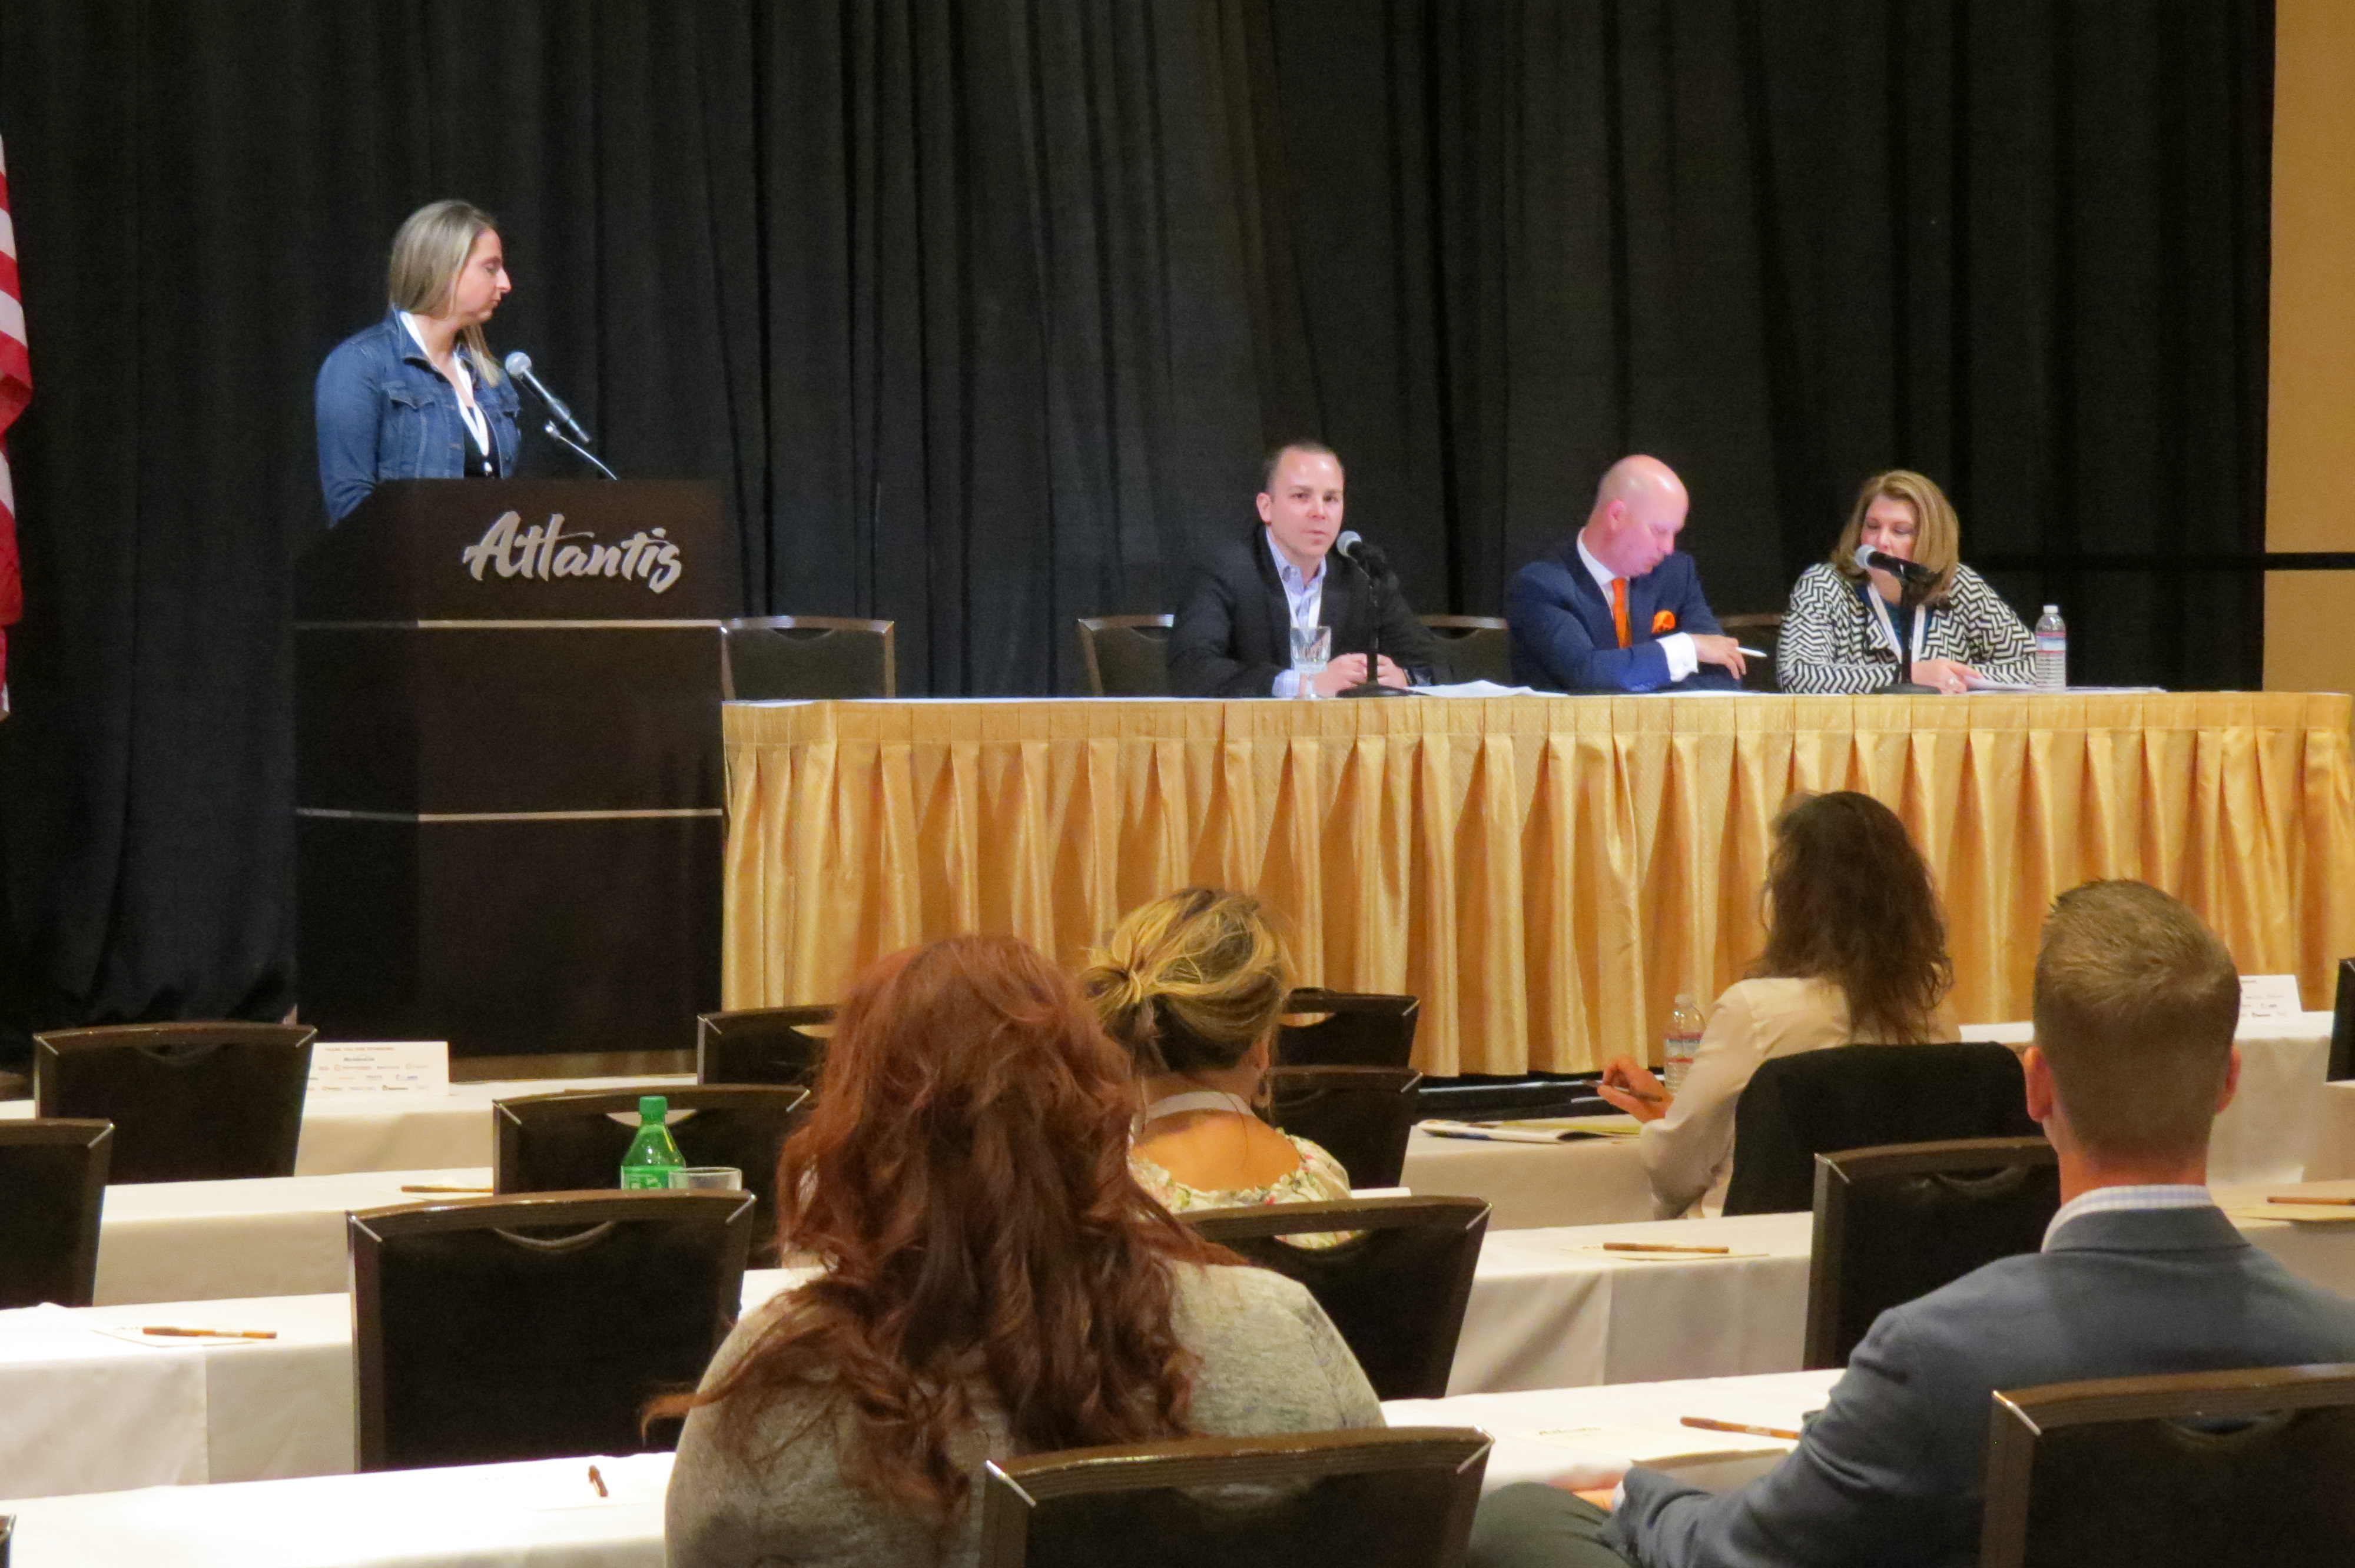 The Resident Screening Panel featured (from left to right) May Warrick of Acranet; Brett Waller of the Washington Multifamily Housing Association; Michael Saltz of Jacobsen, Russell, Saltz, Nassim &amp; DeLa Torre; and Christi Lawson of Foley &amp; Lardner LLP